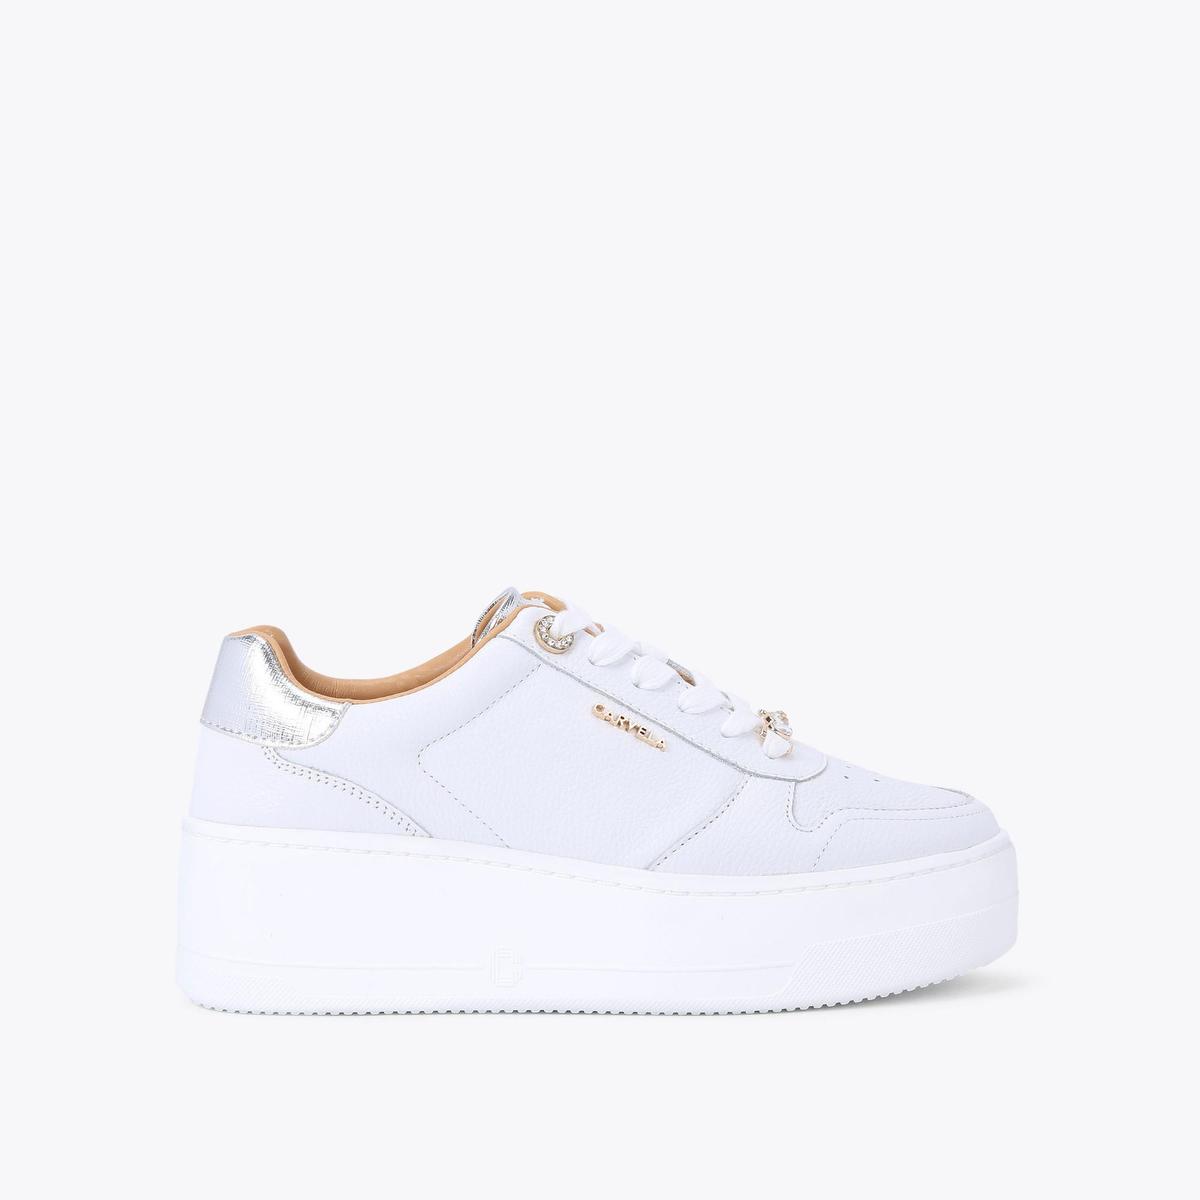 Page 3 | Women's Trainers | Metallic & White Leather Trainers | Kurt Geiger